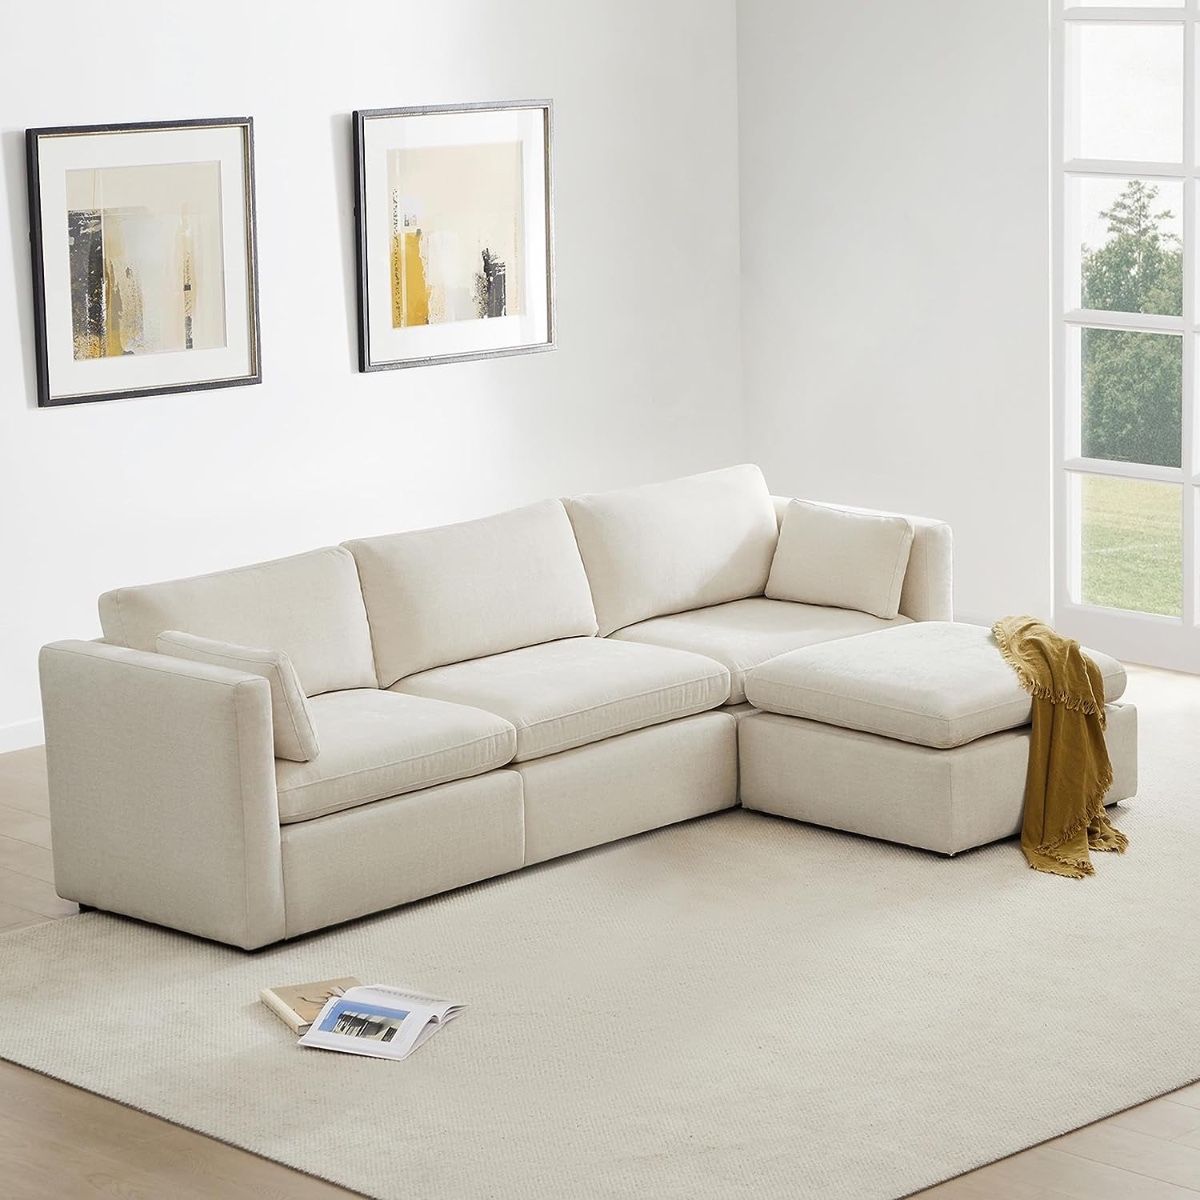 Ultimate Comfort: Embrace Luxury Living with Extra Large Sectional Sofas with Chaise